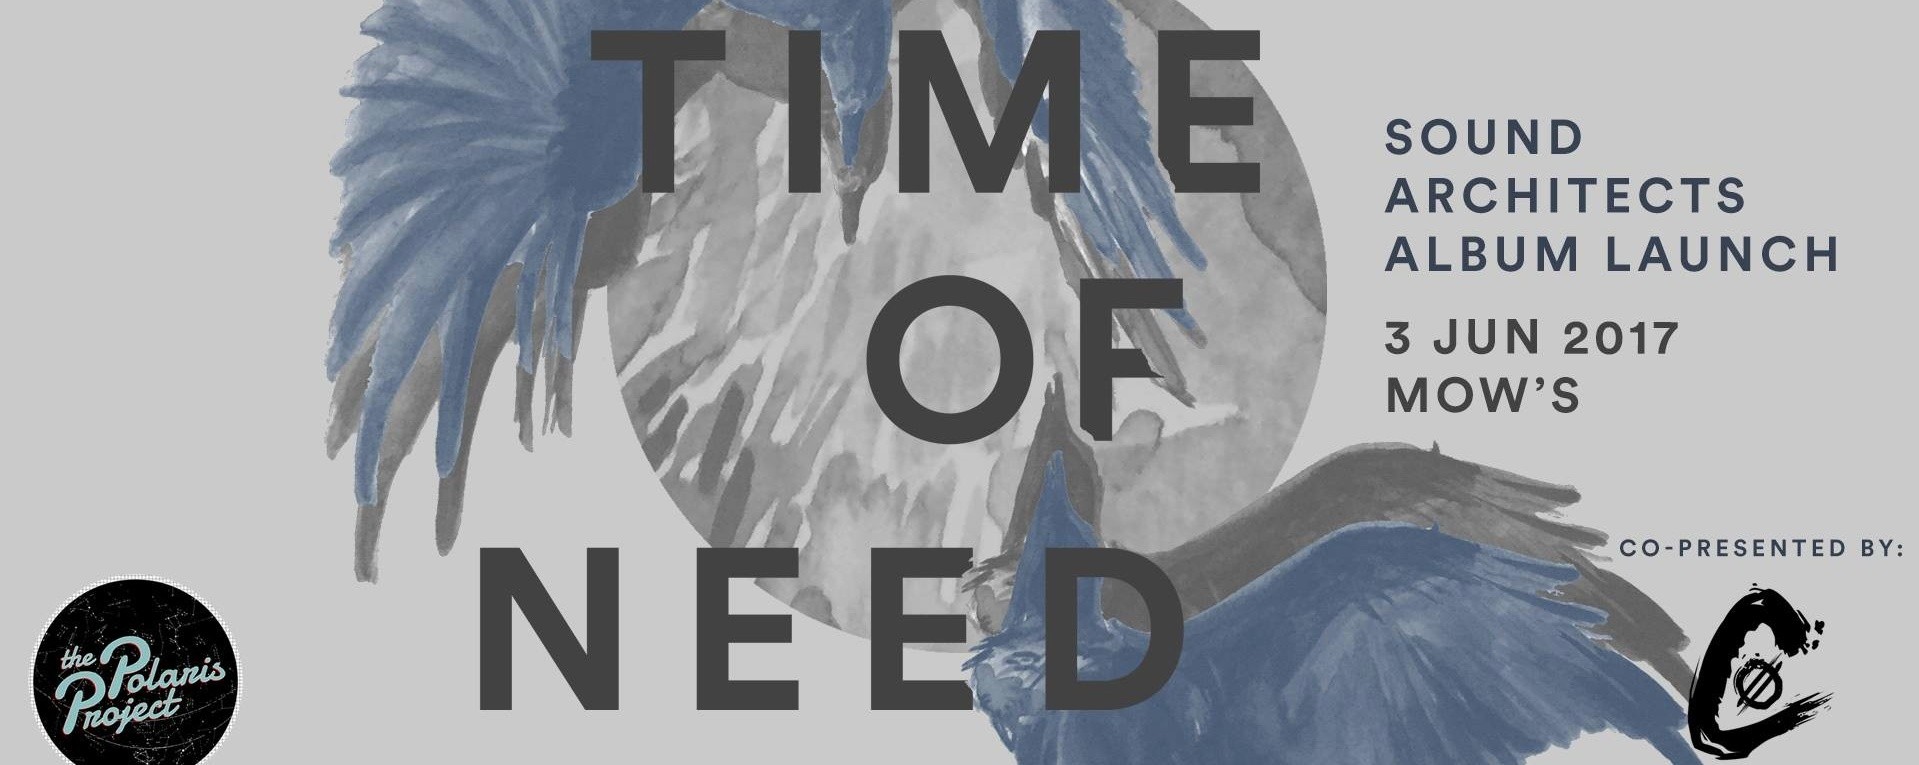 In Time Of Need: Sound Architects Album Launch